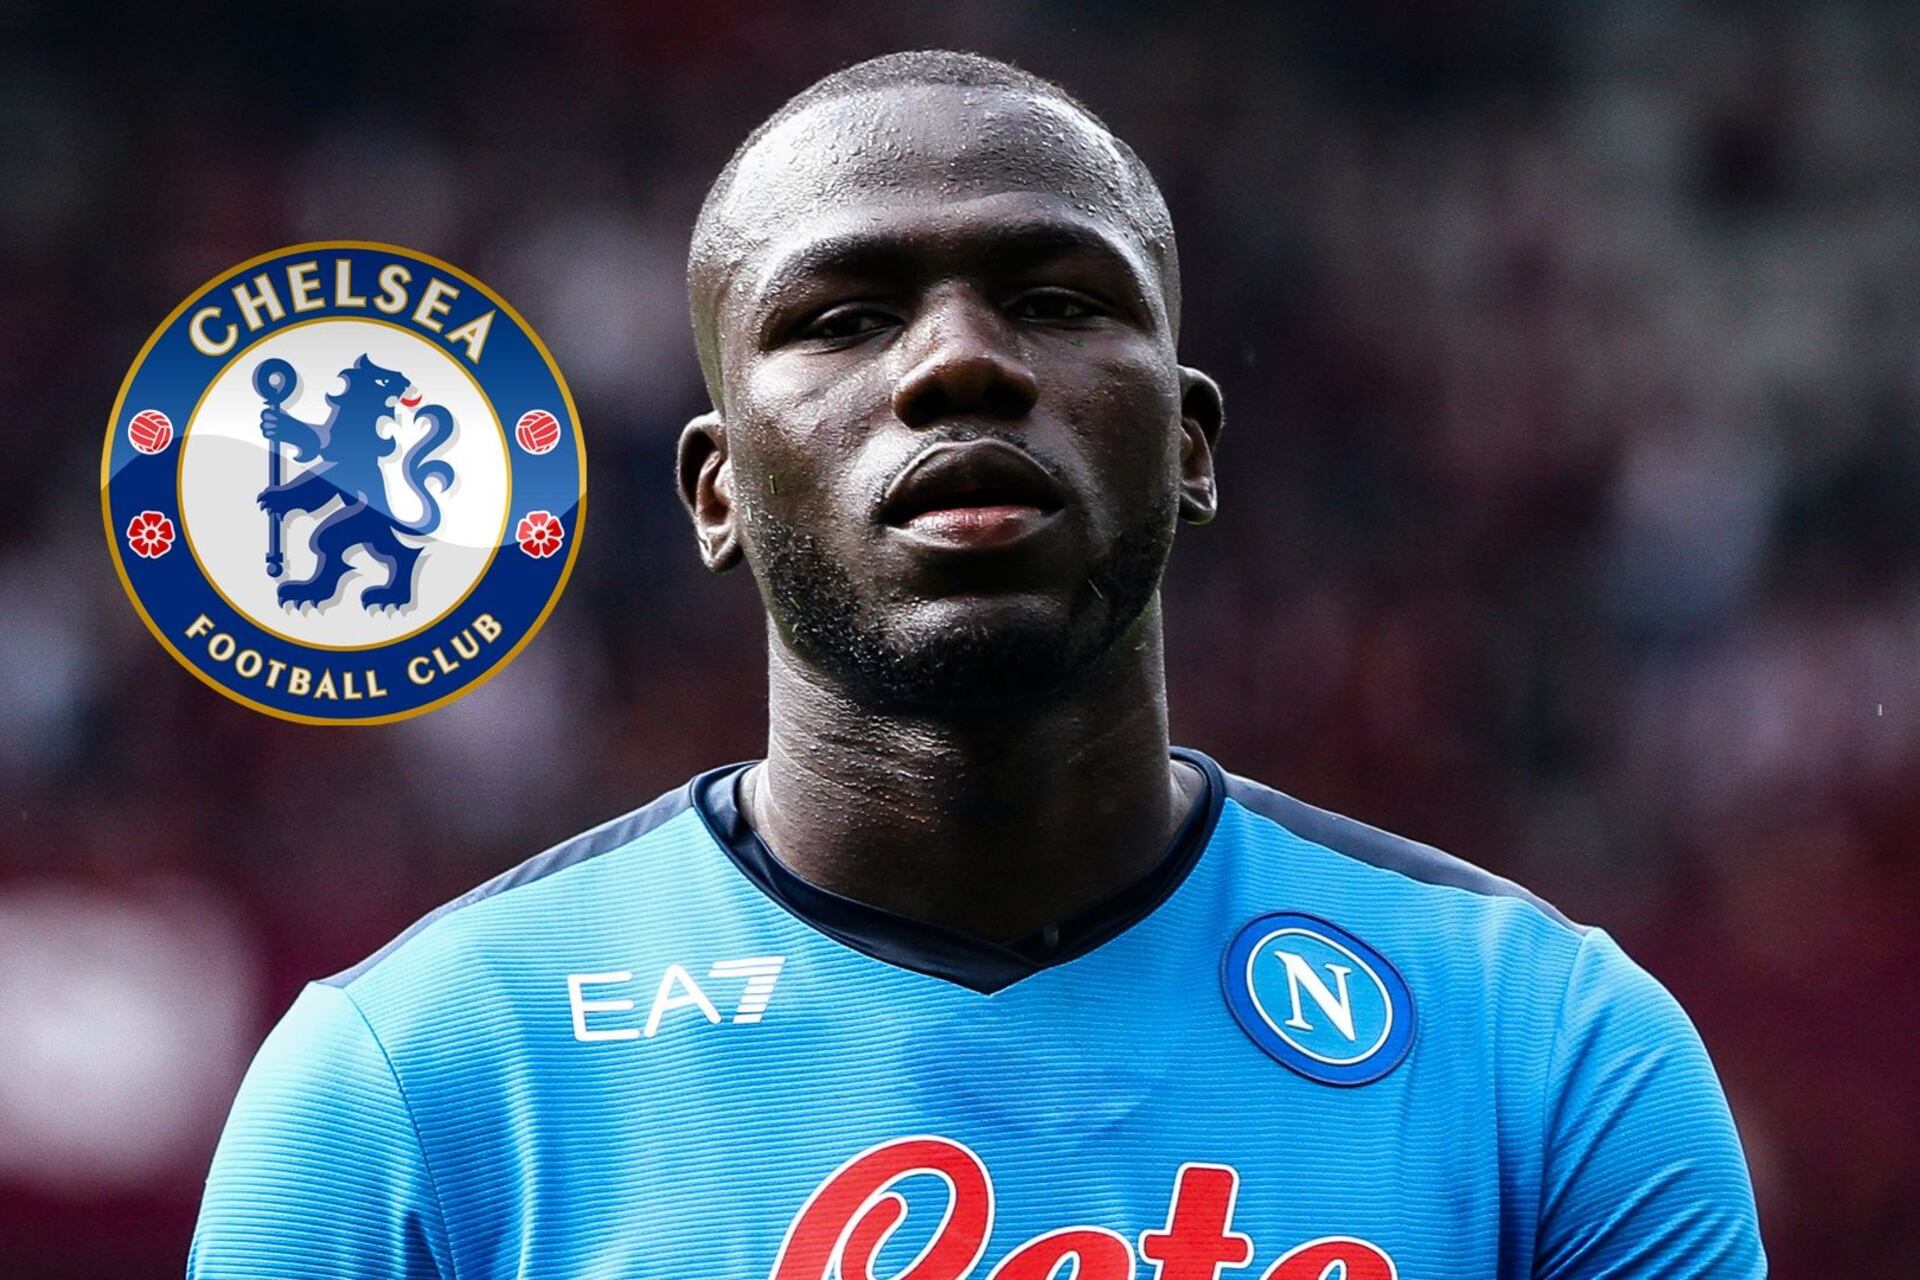 Thomas Tuchel's search for a defender continues, Chelsea have made a new offer for Koulibaly